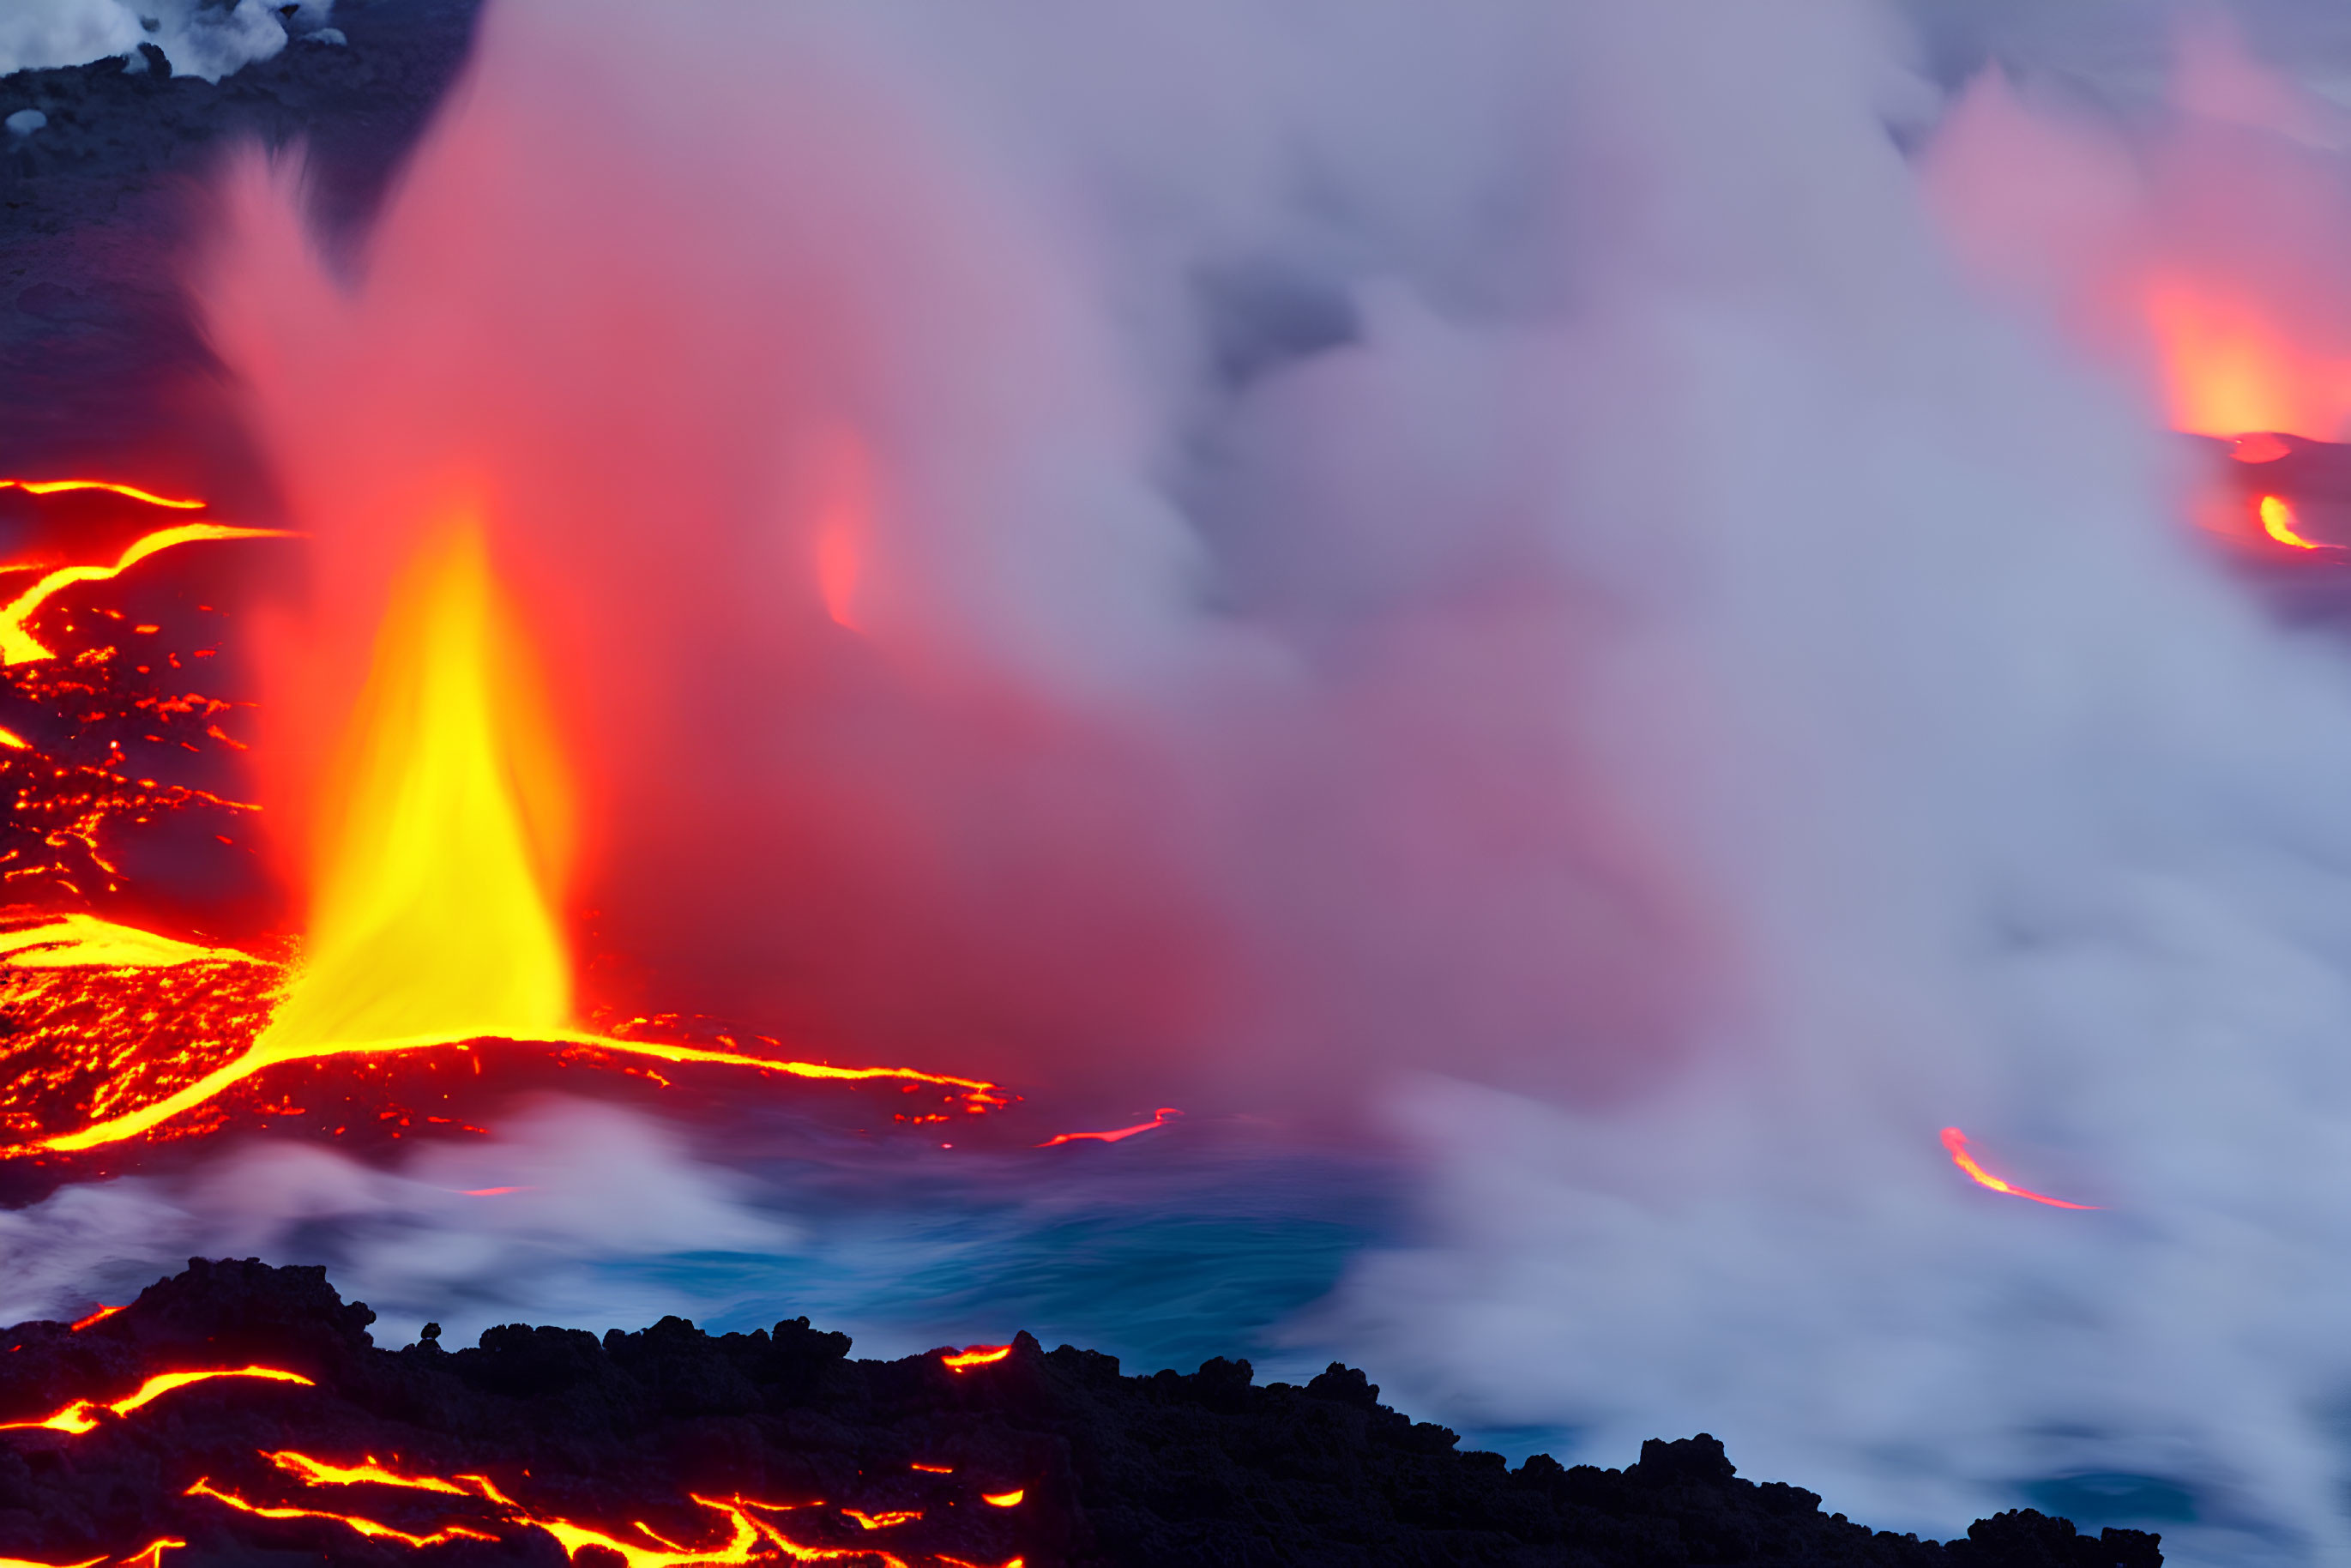 Erupting lava flows with glowing orange and red hues on dark, rocky terrain